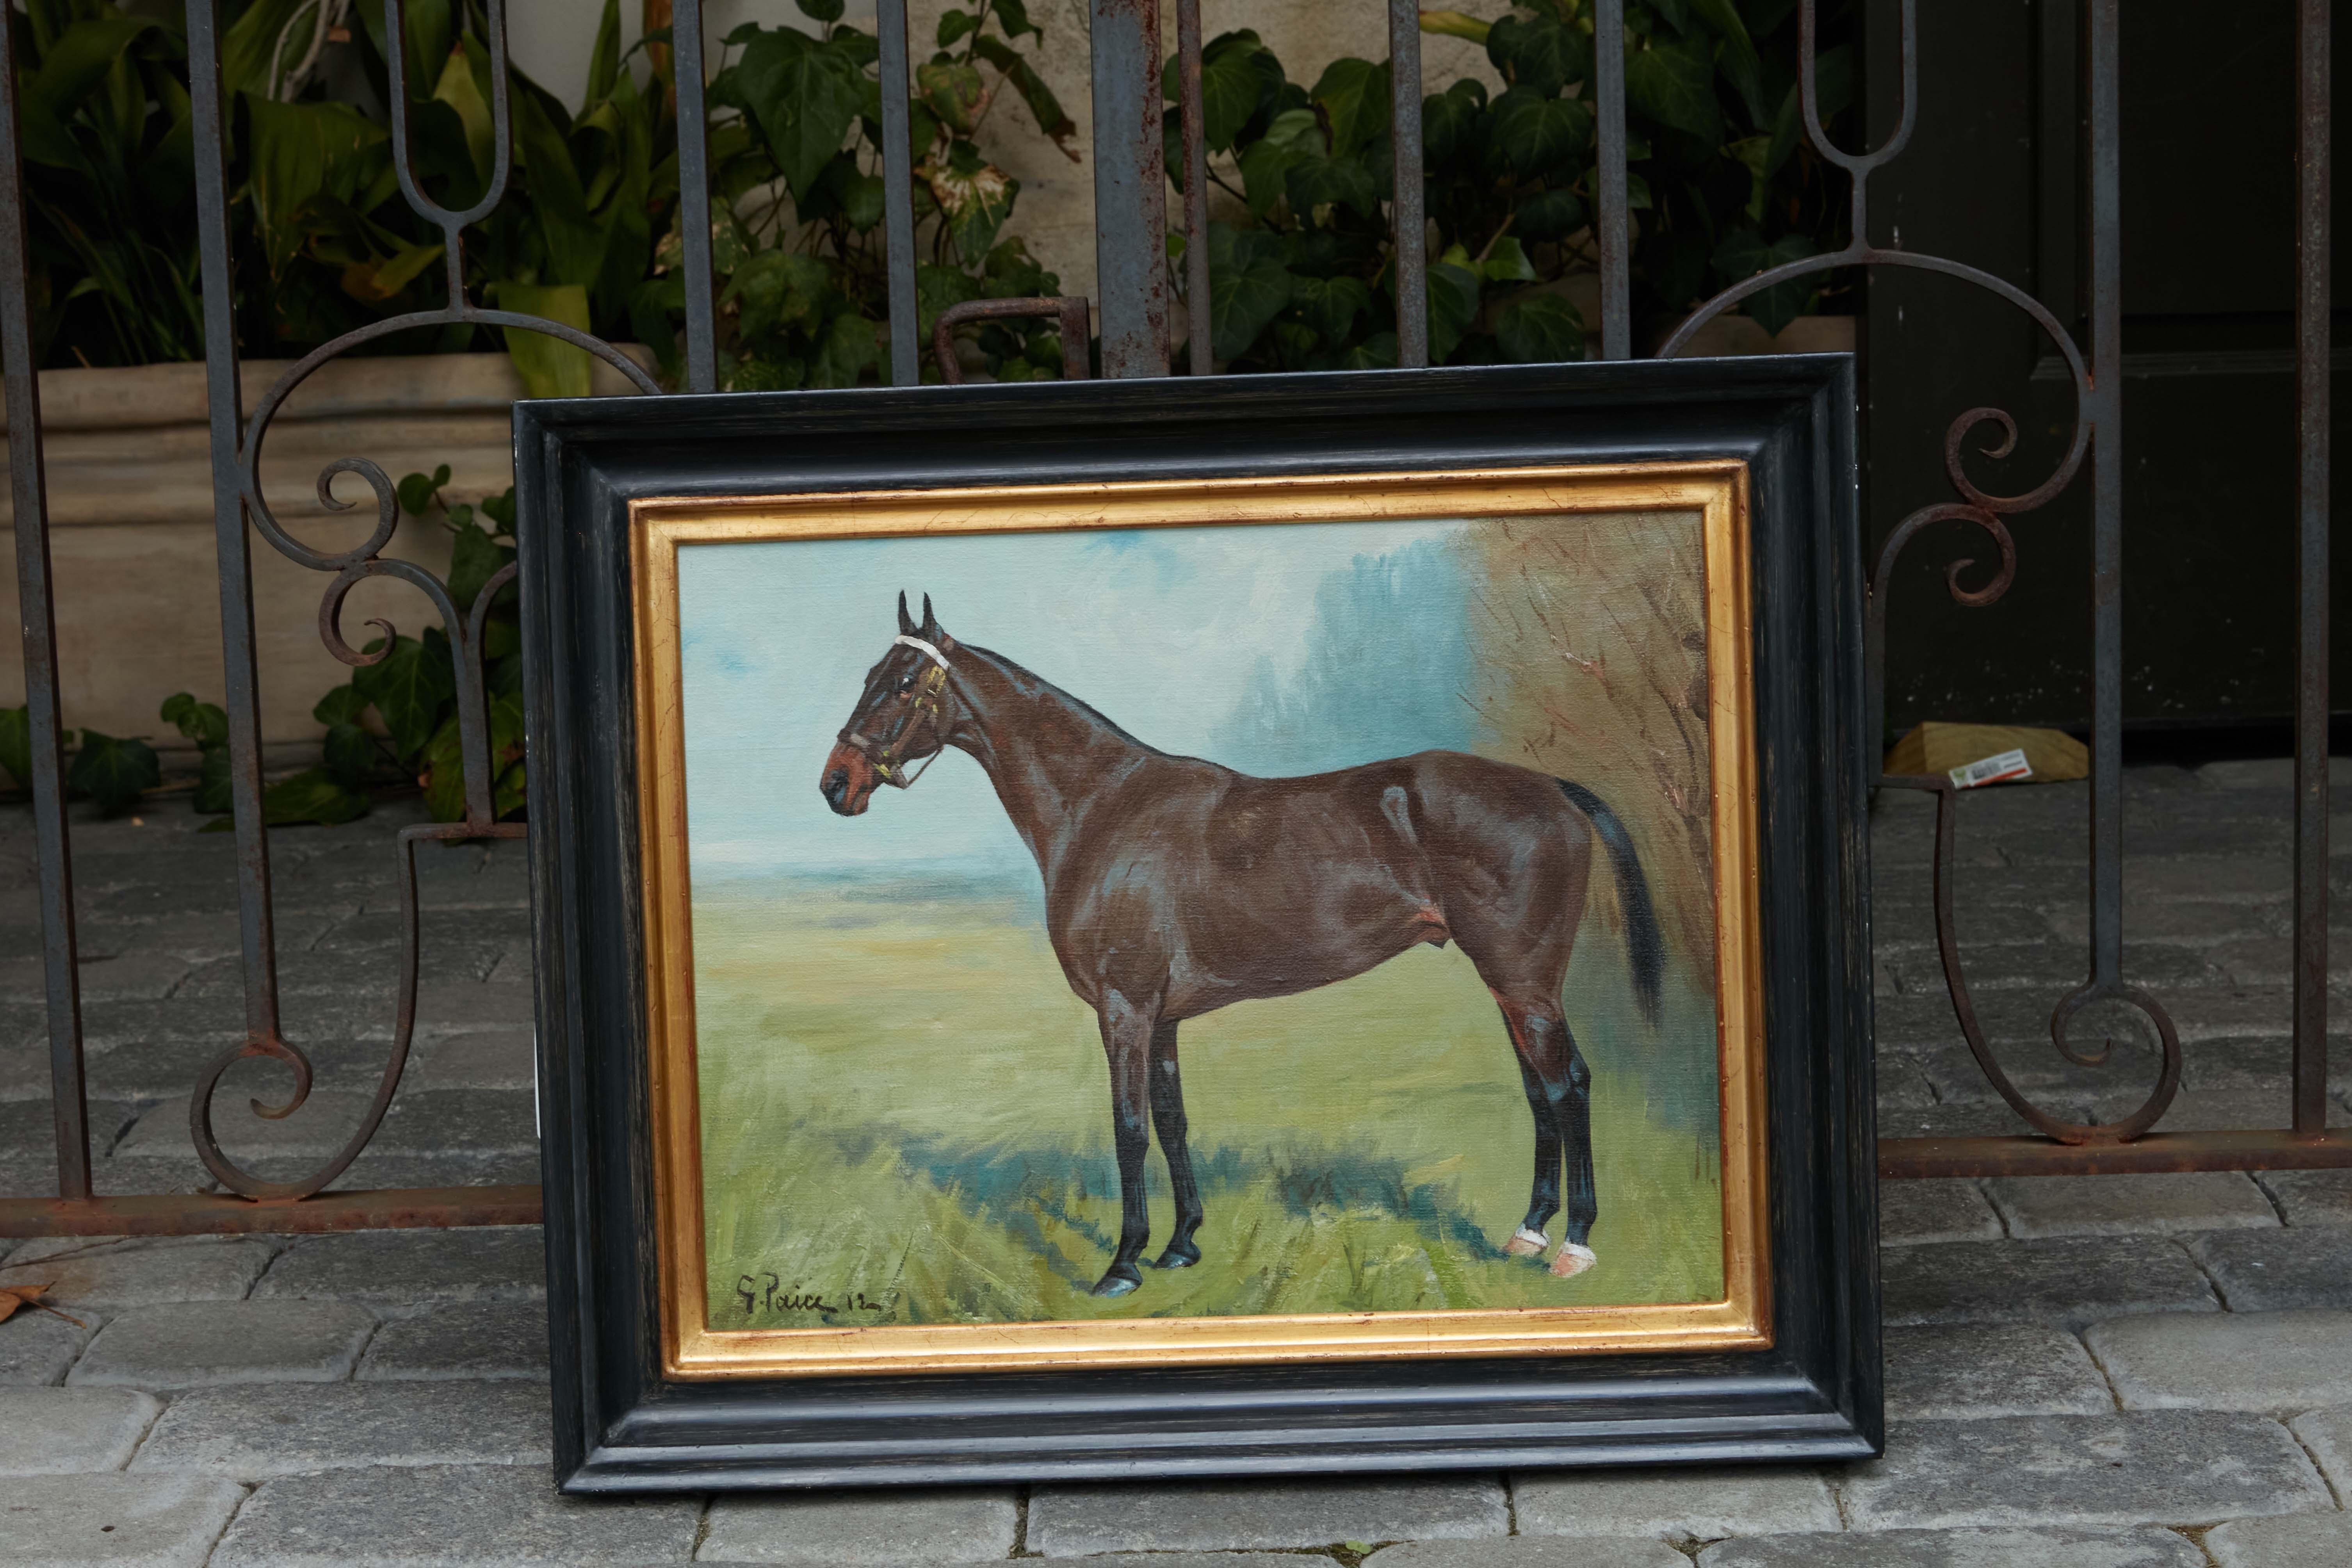 Hand-Painted English George Paice 1912 Oil on Canvas Equestrian Painting with Black Frame